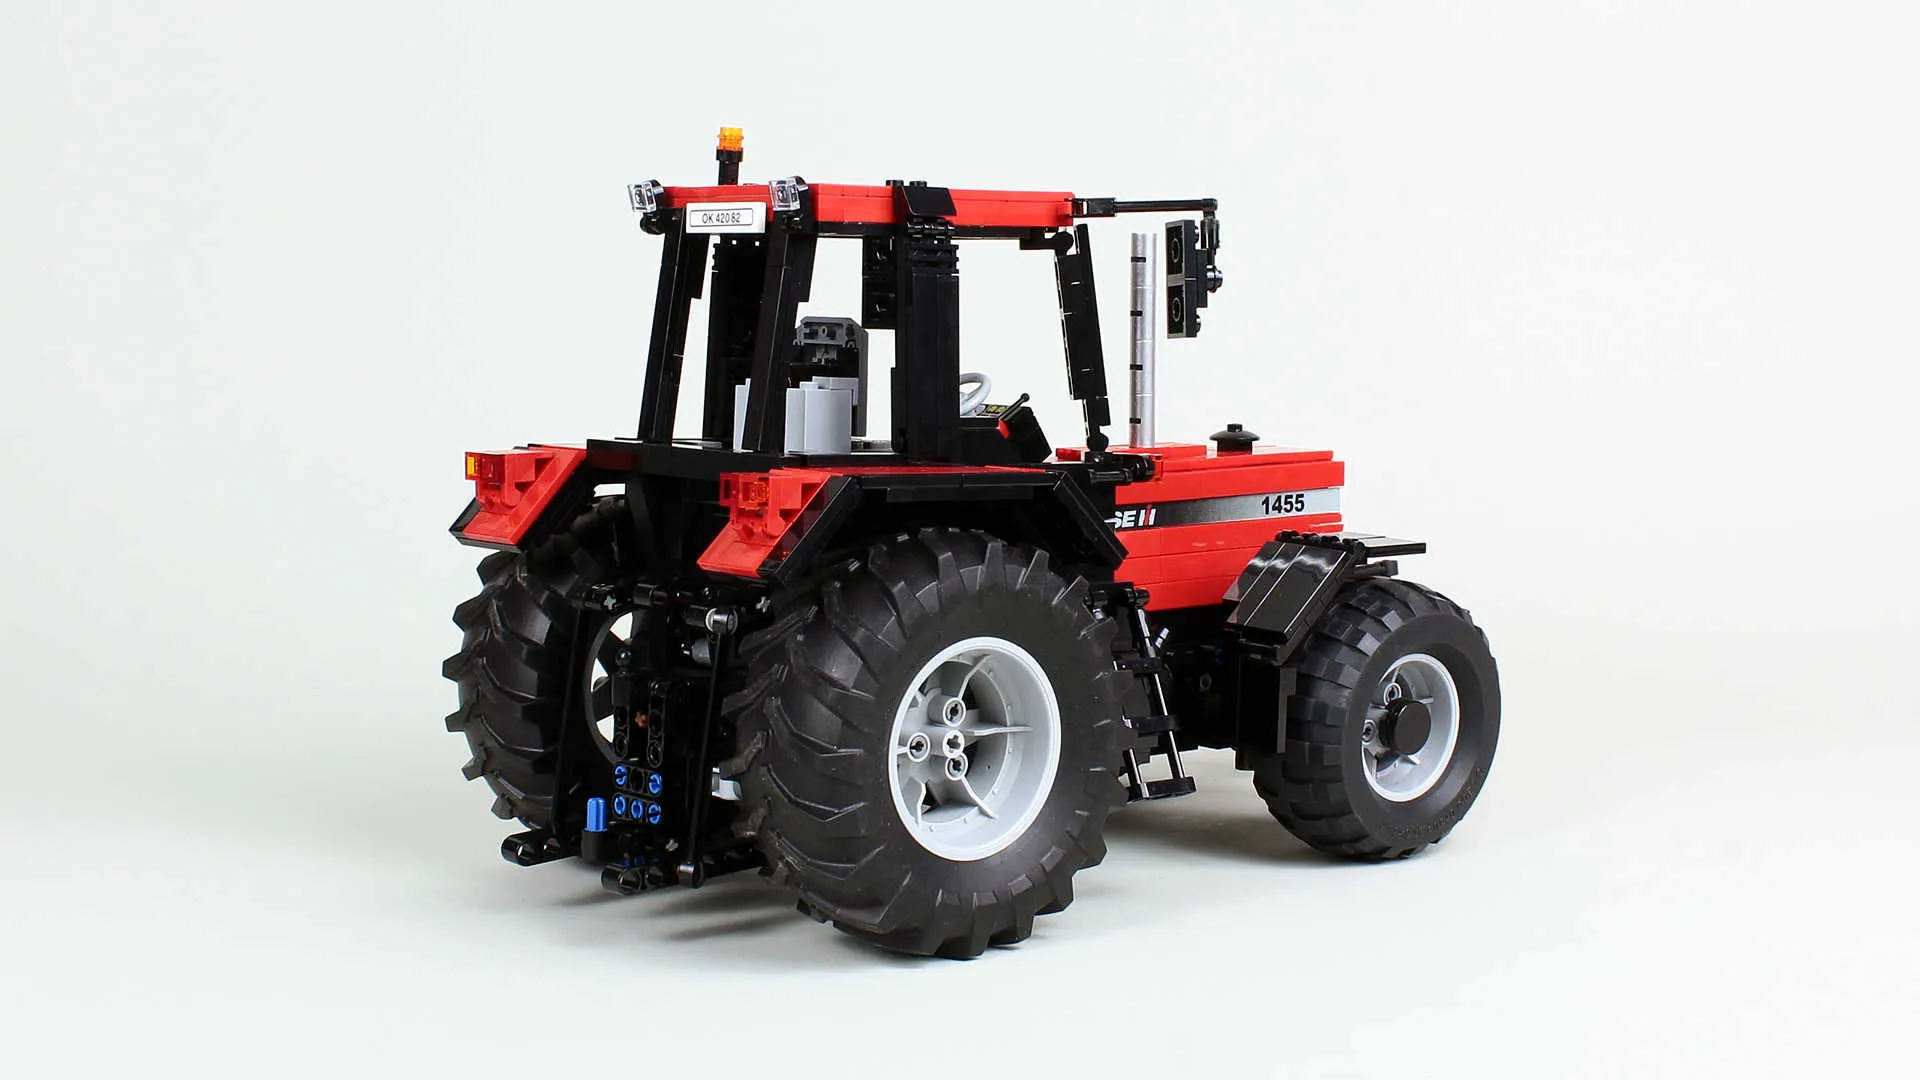 2021 NEW Science and technology building block moc-54812 farm tractor dump truck remote assembly toy model boy's birthday gift Q0624